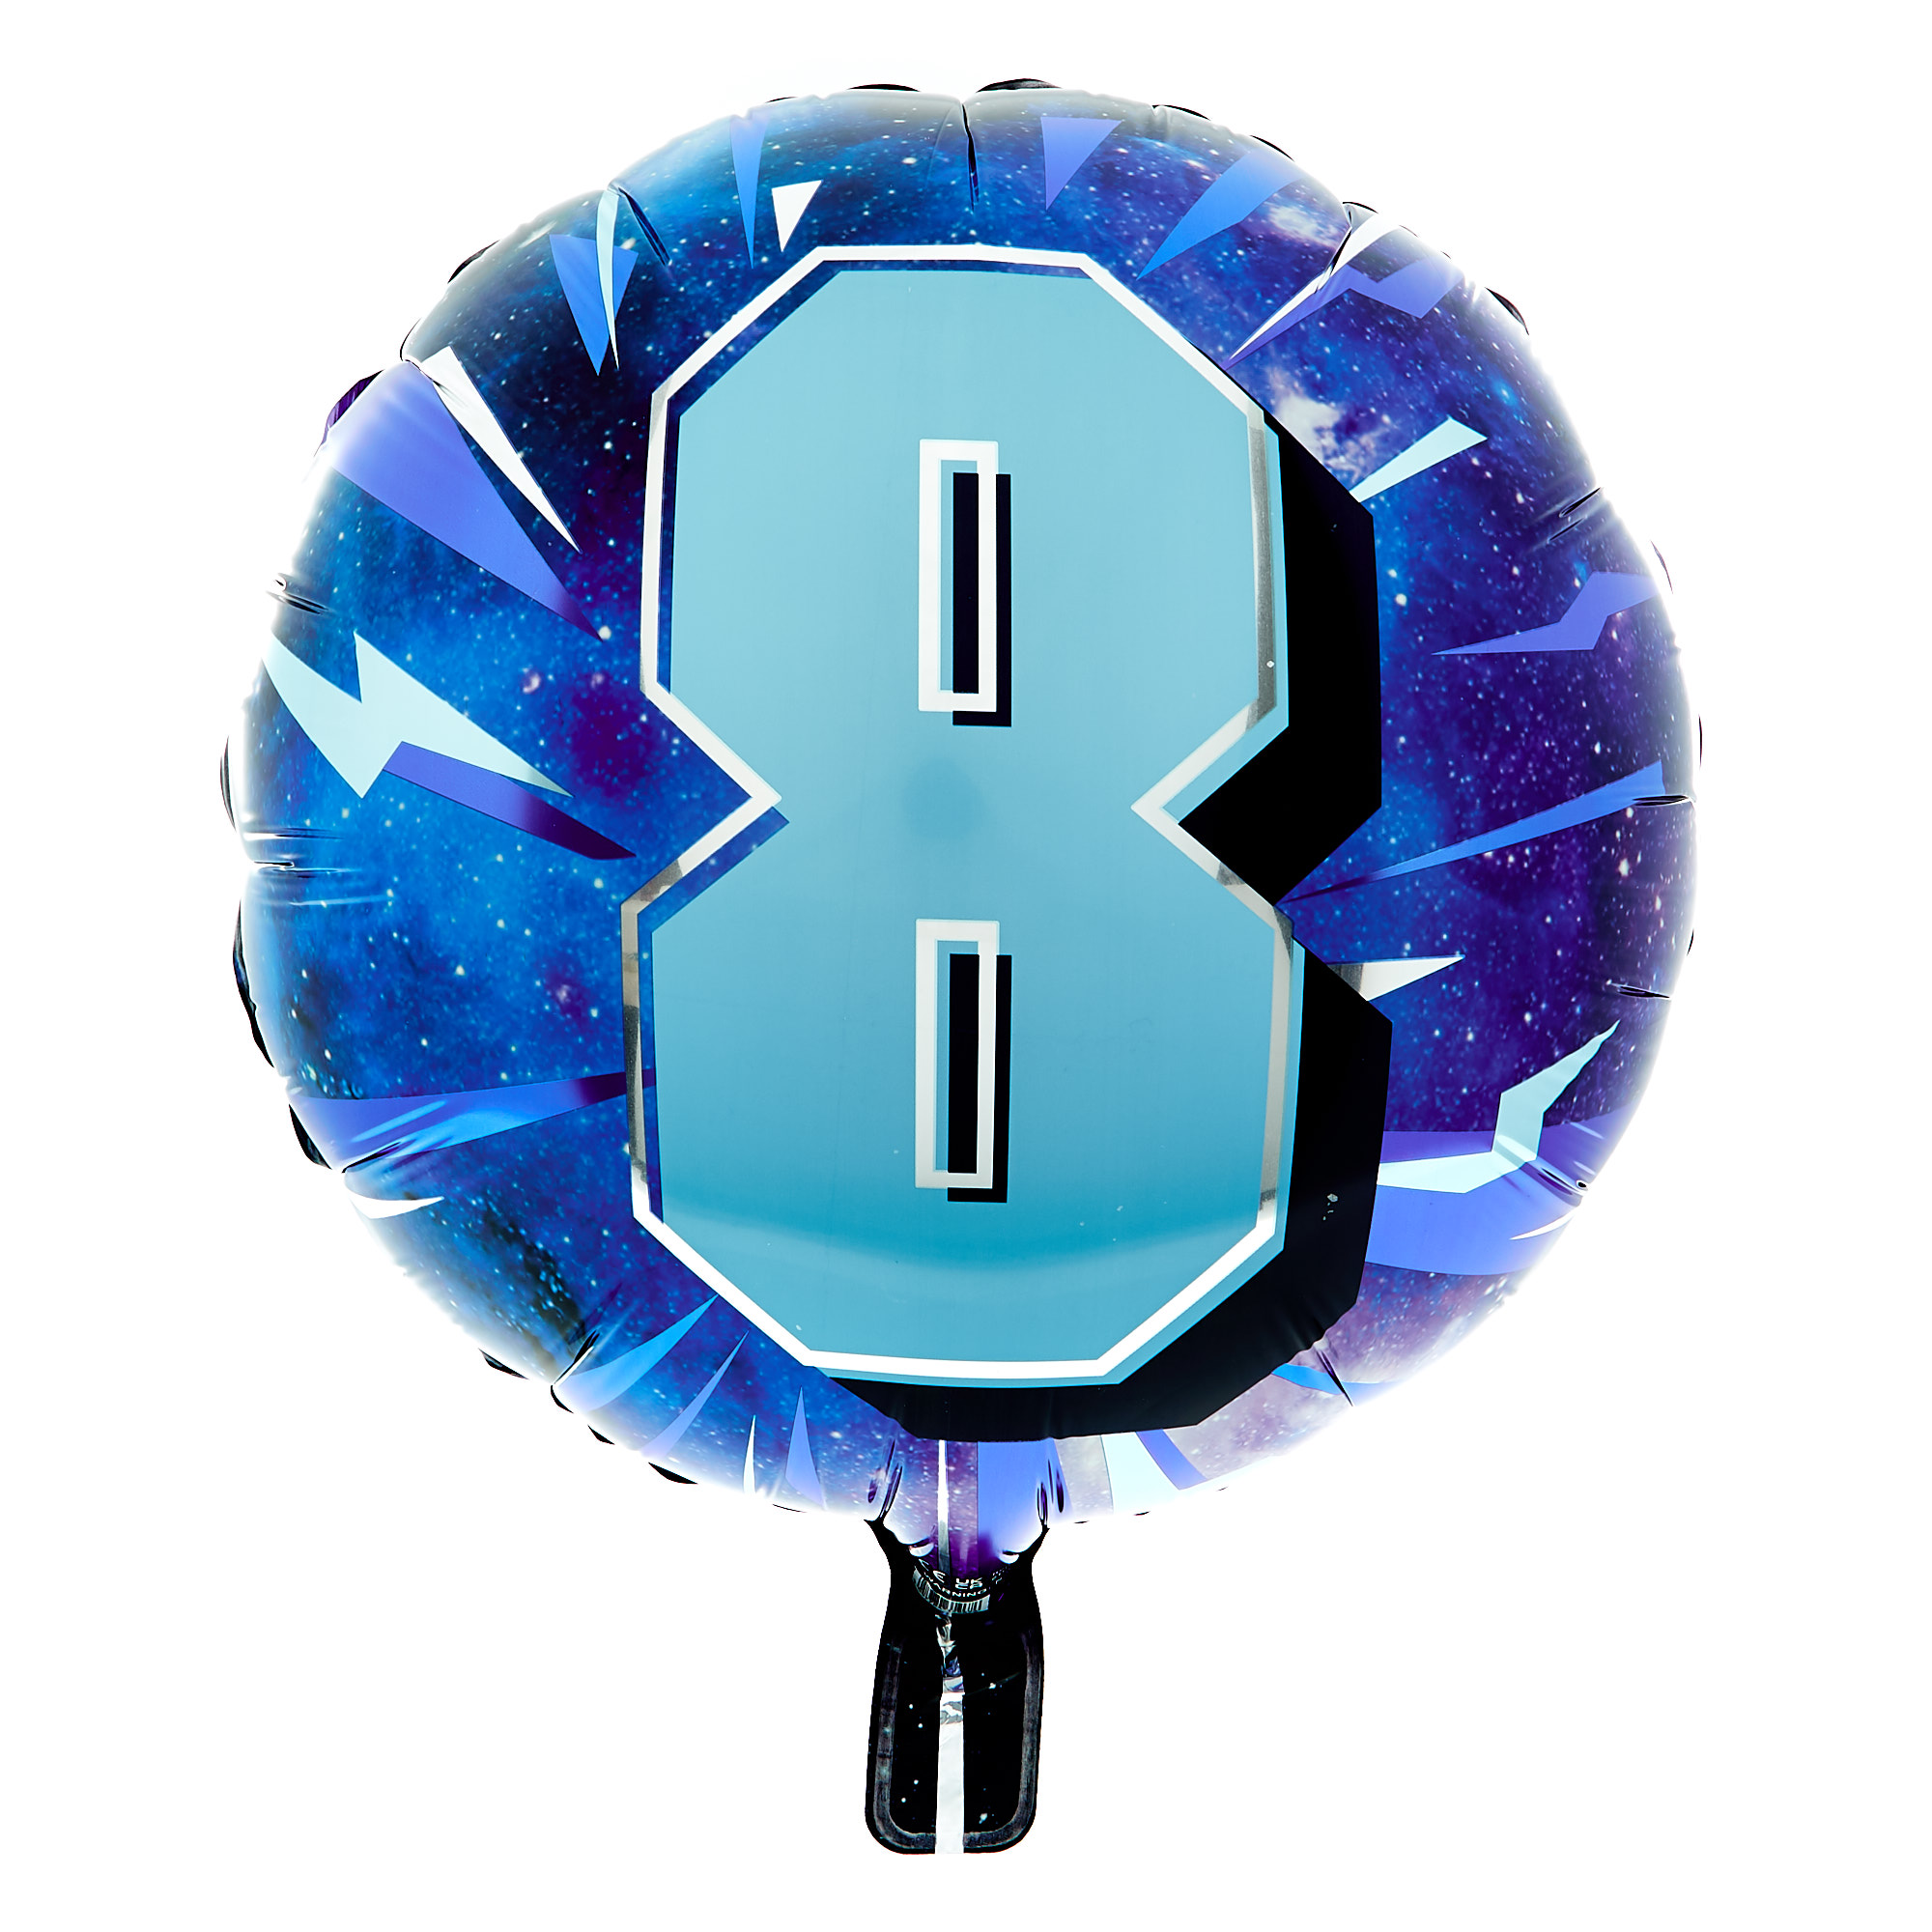 Blue 8th Birthday Balloon Bouquet - DELIVERED INFLATED!